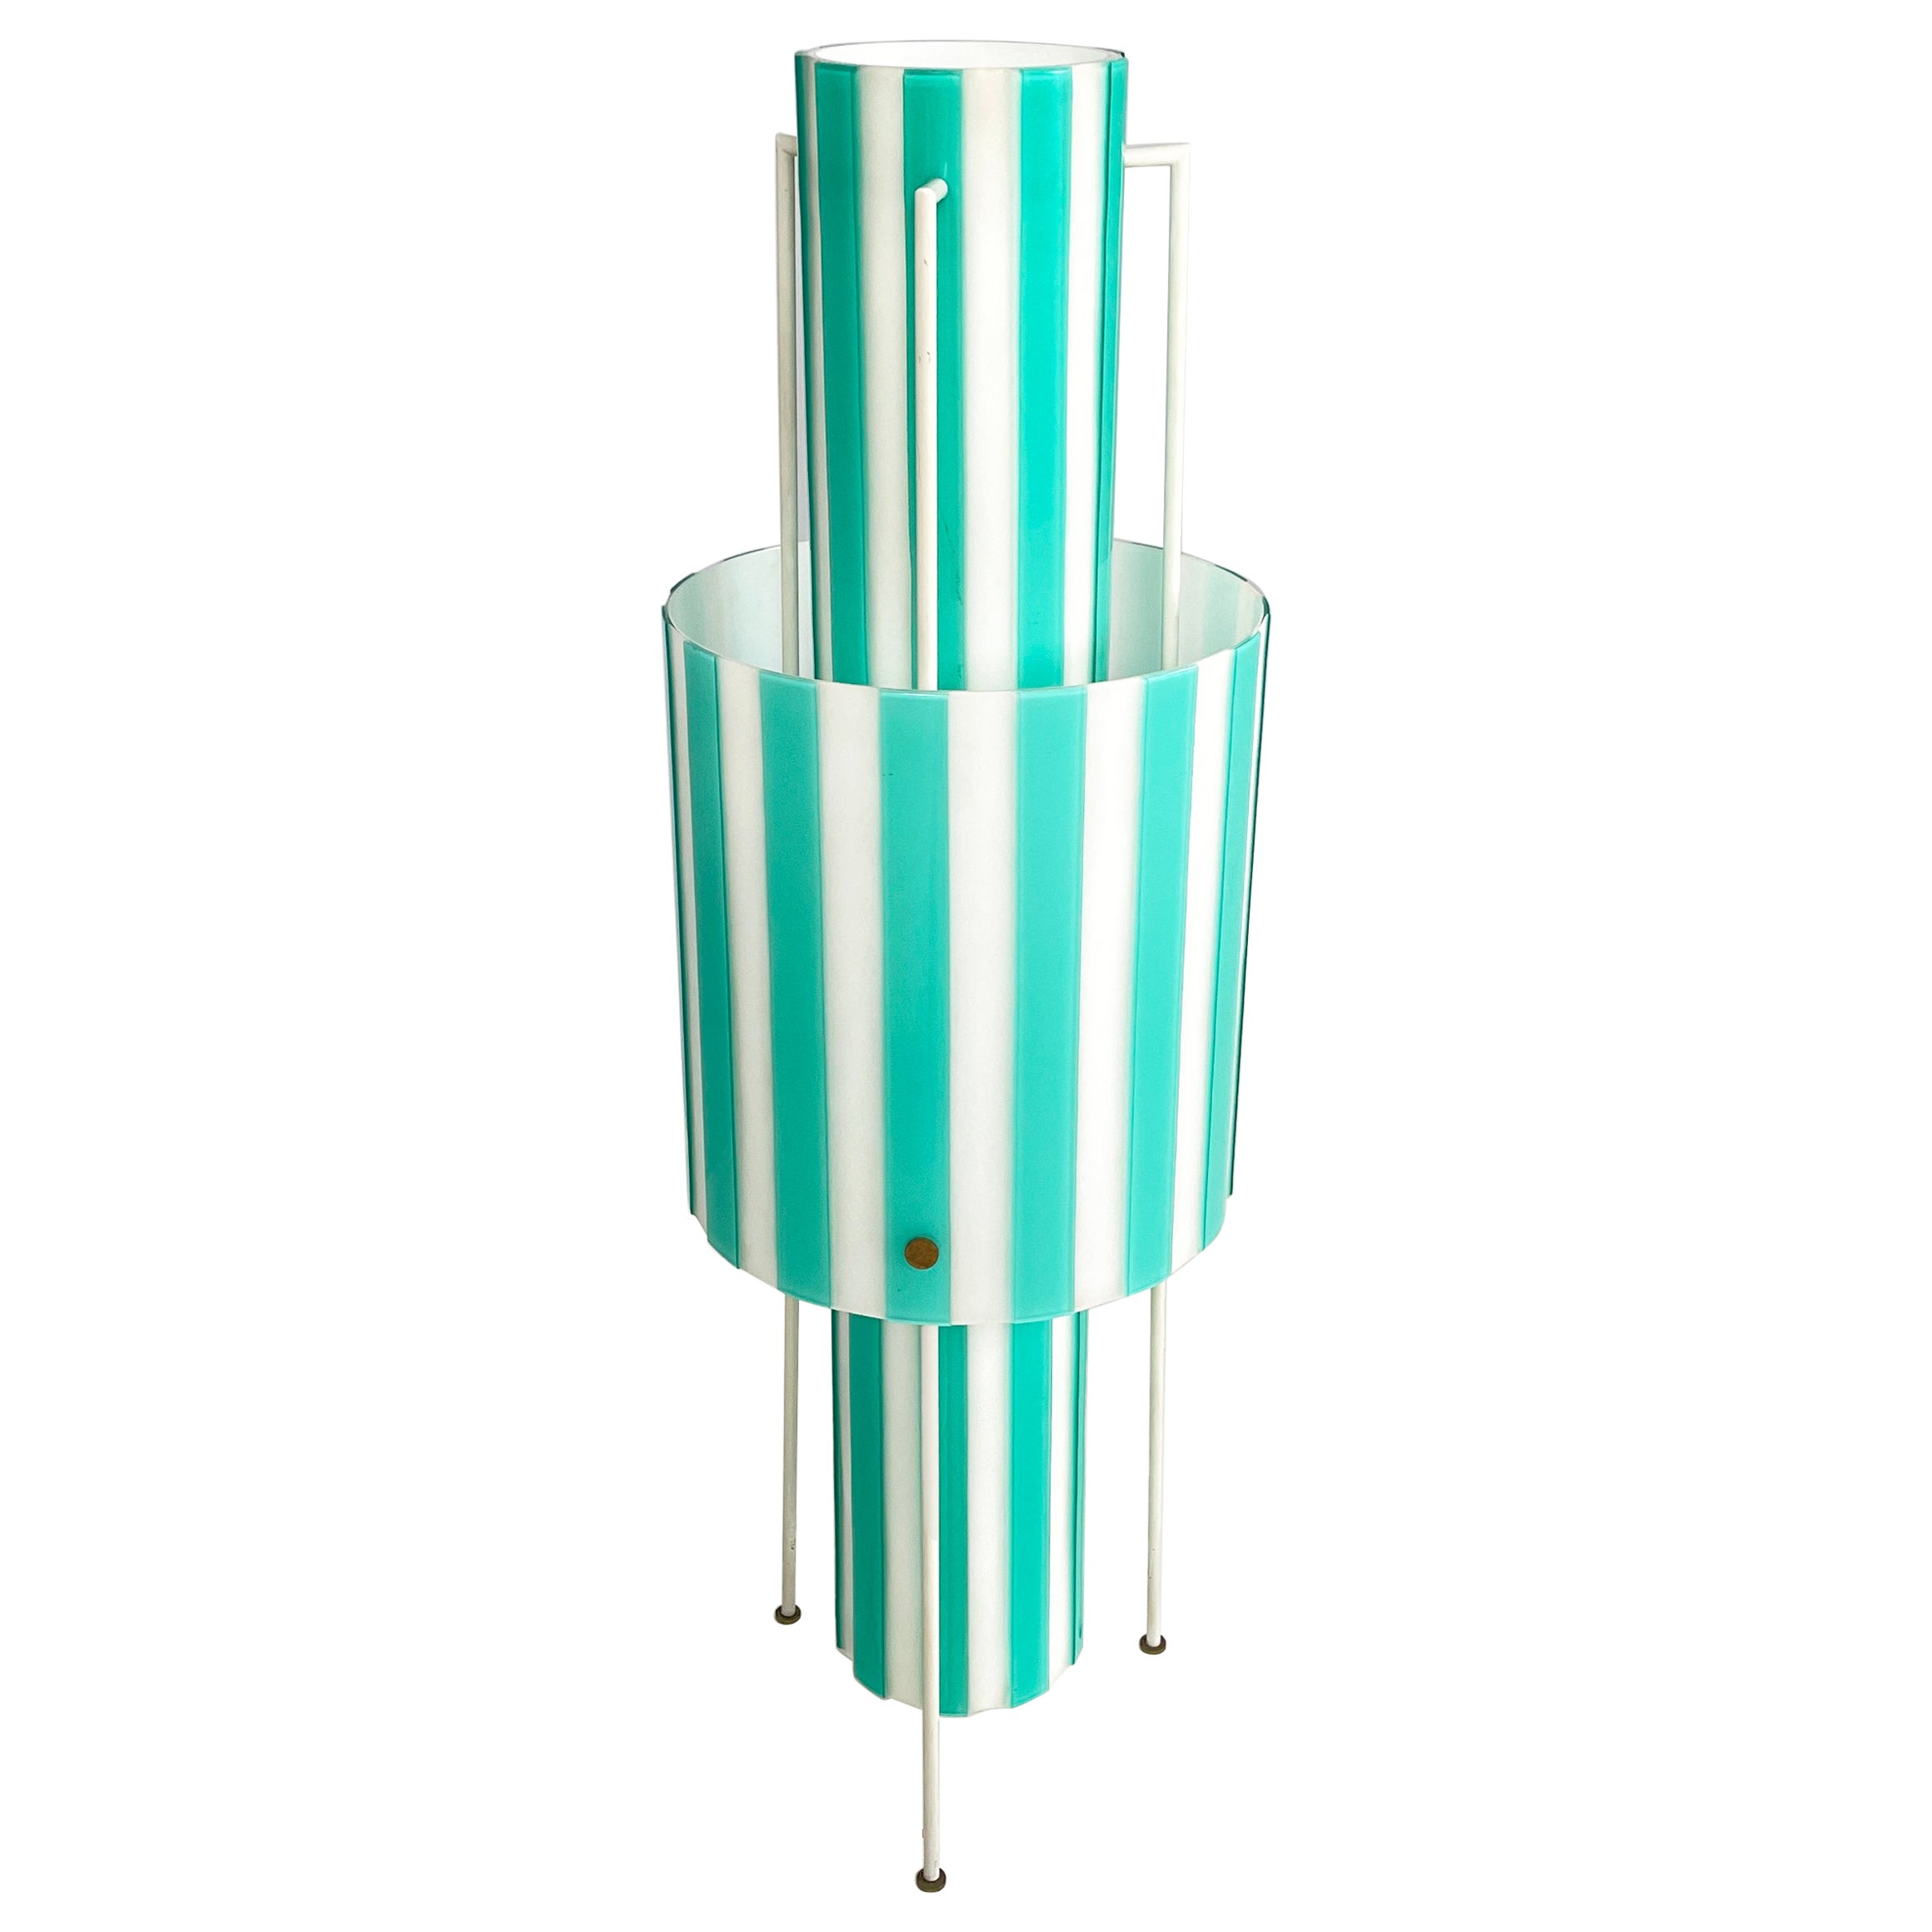 Italian mid-century Floor lamp in white and light blue glass with metal, 1950s For Sale